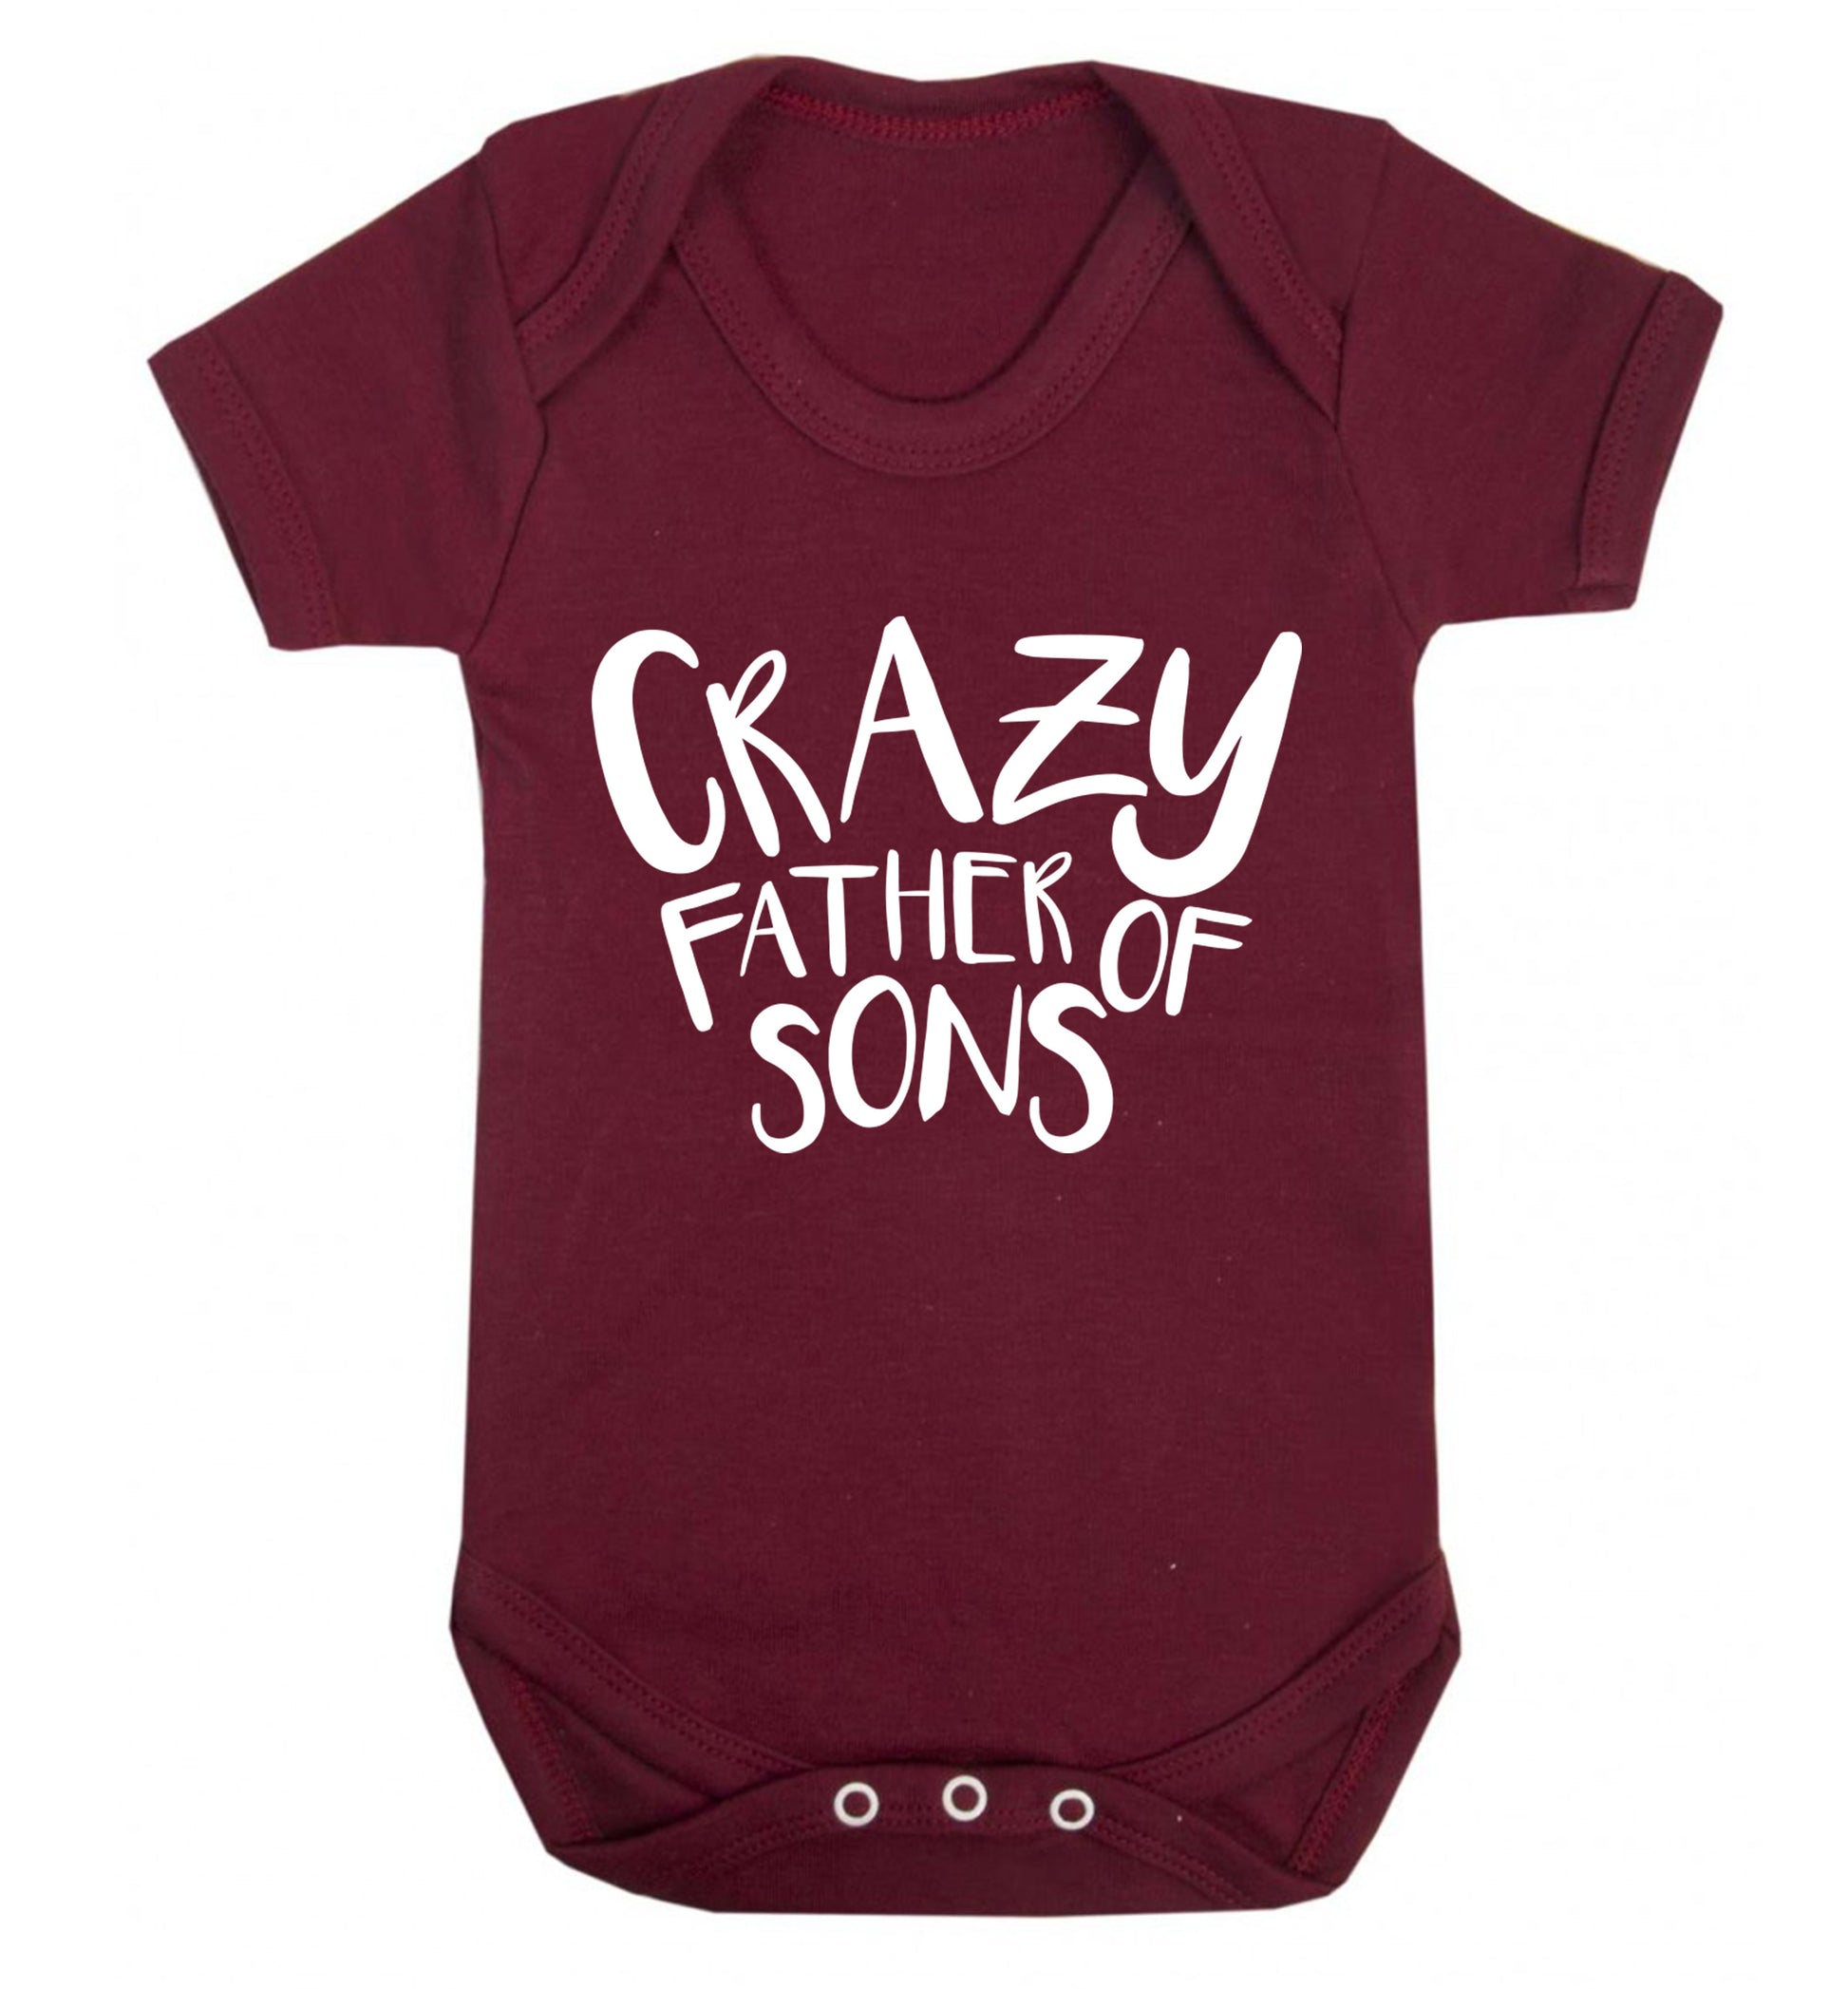 Crazy father of sons Baby Vest maroon 18-24 months